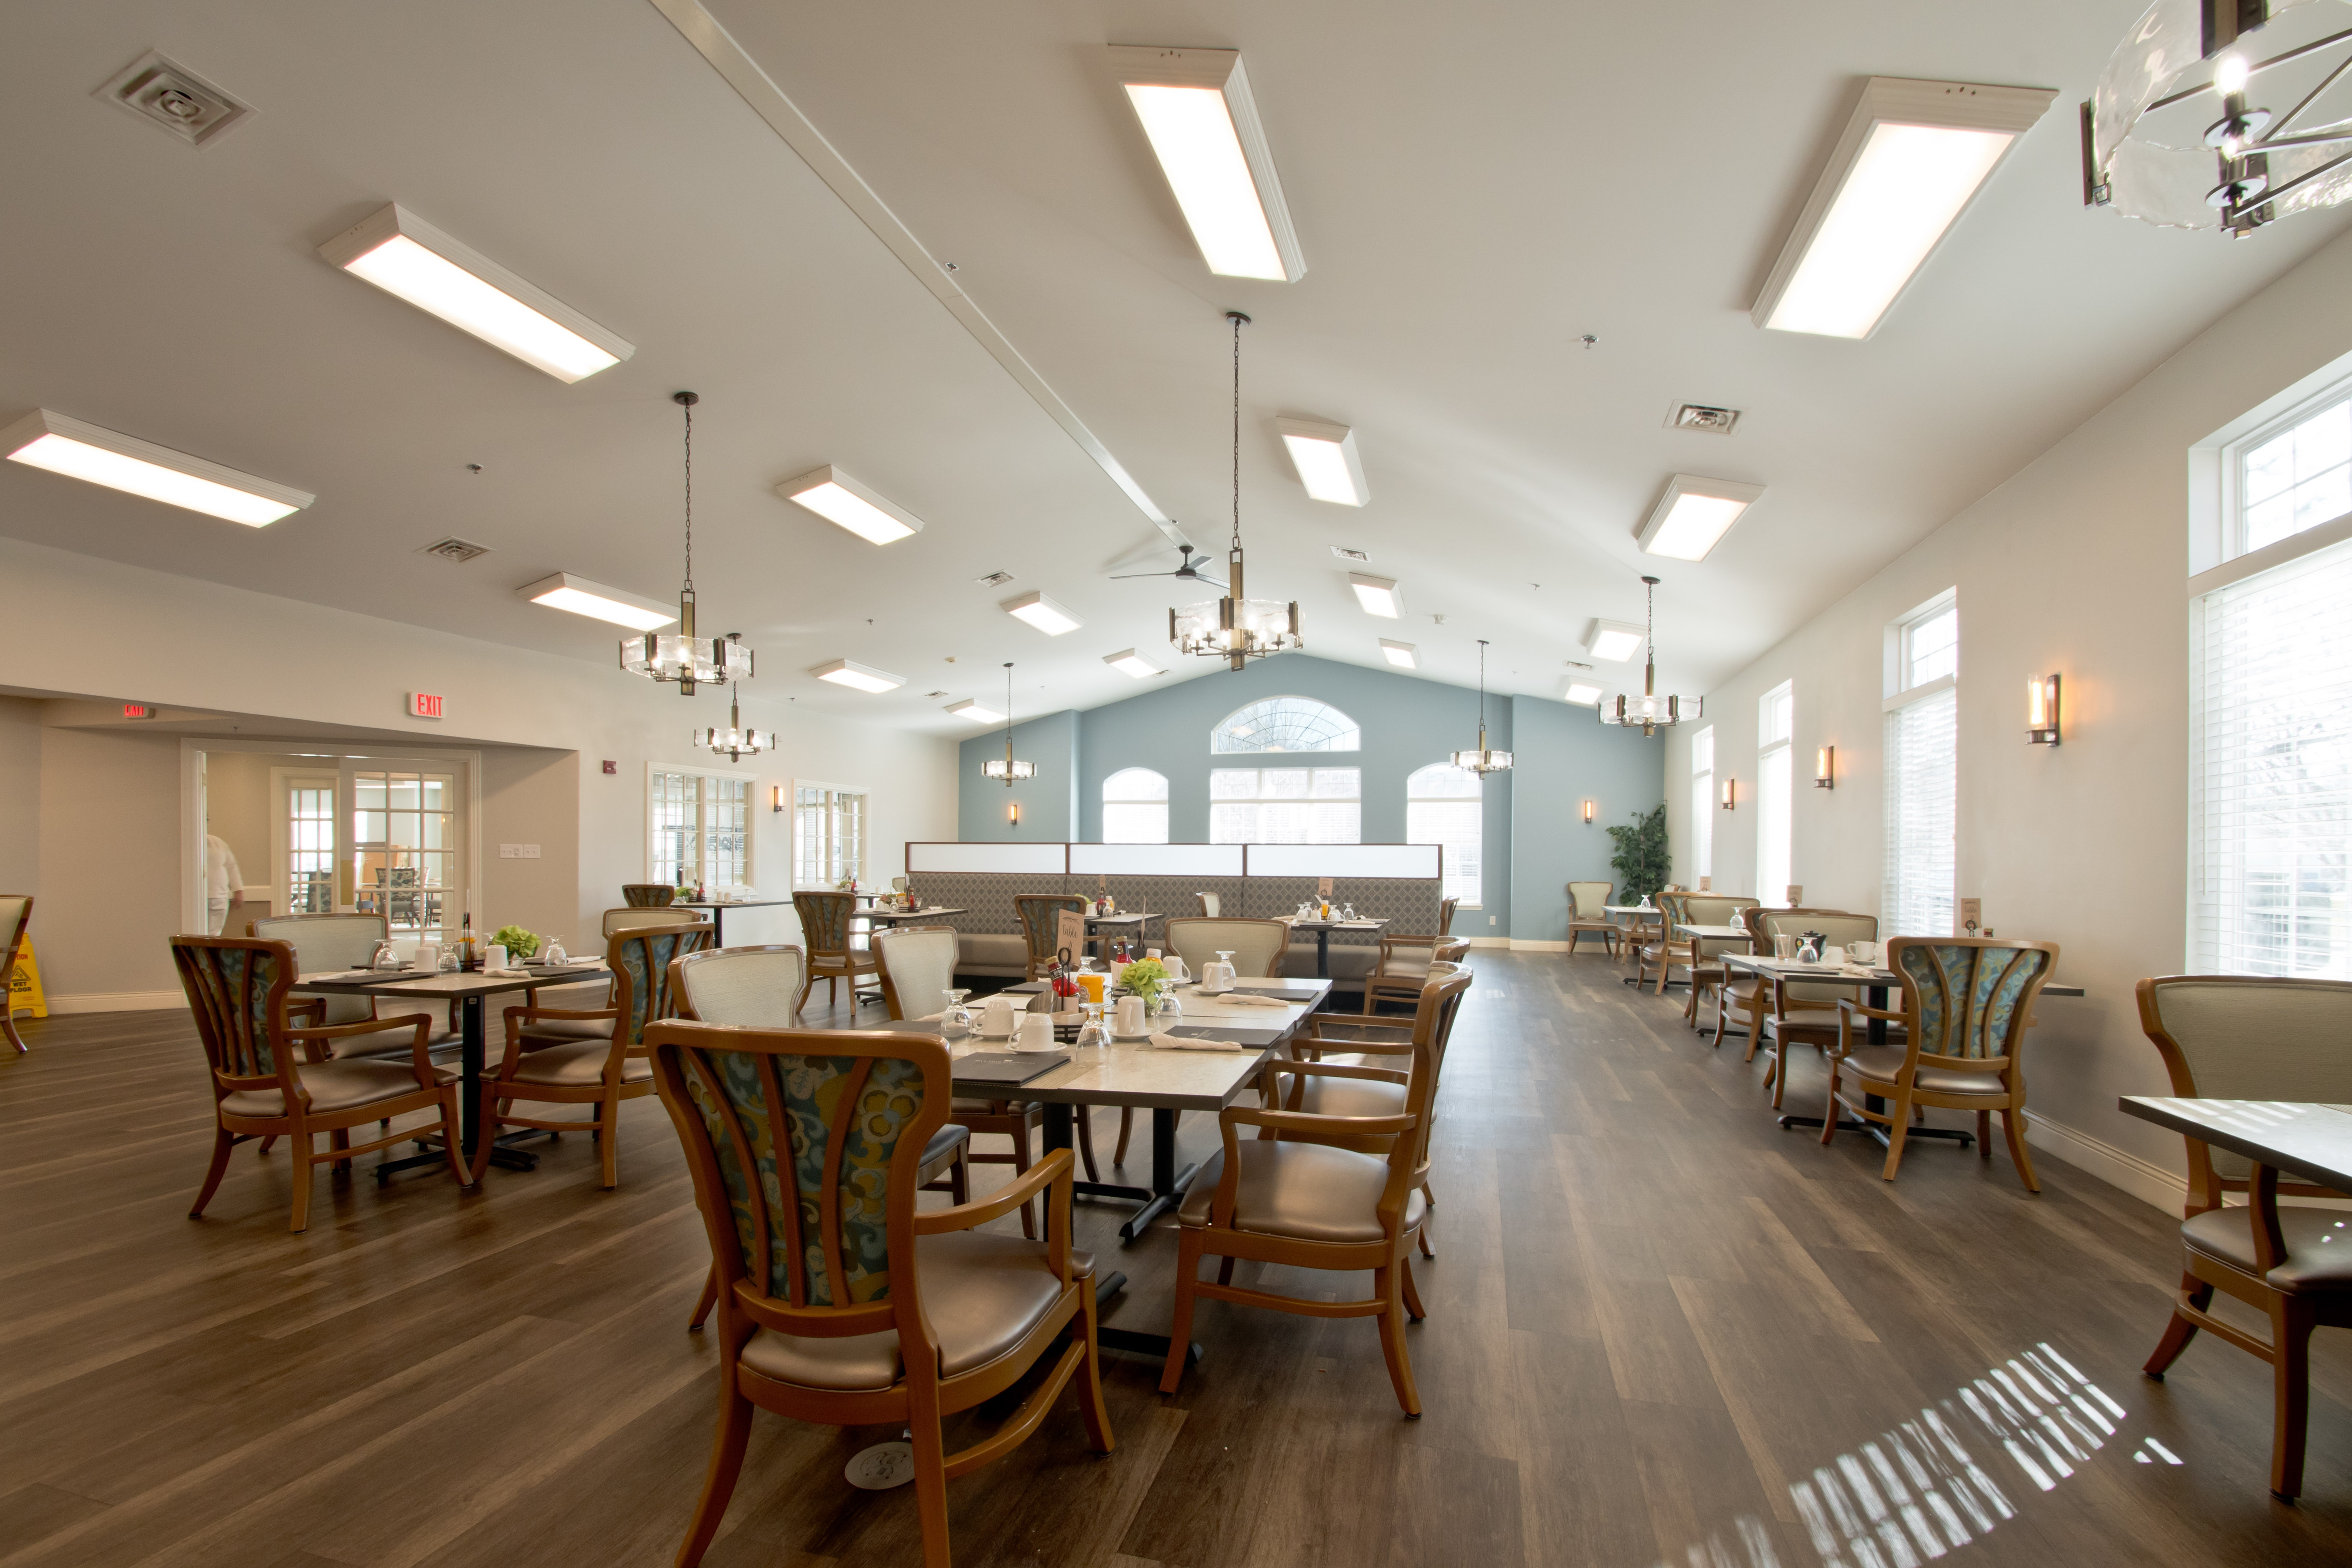 Five Star Residences of Noblesville dining room